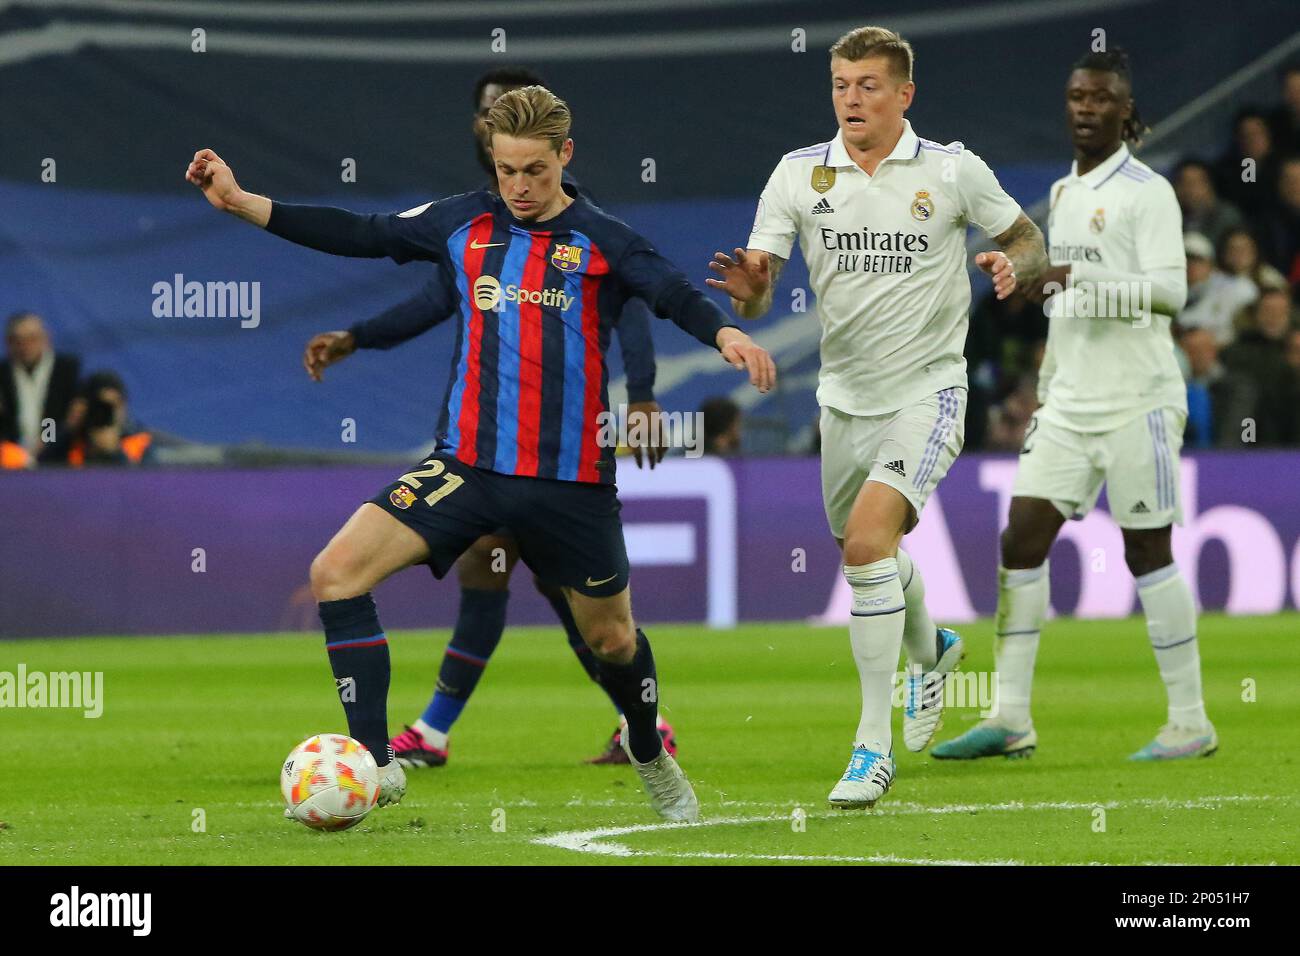 Madrid, Spain, on March 2, 2023. Barcelona´s F.De Jong (L) and Real Madrid´s Toni Kroos (R) in action during Copa del Rey Semifinal Match between Real Madrid and FC Barcelona at Santiago Bernabeu Stadium in Madrid, Spain, on March 2, 2023. Stock Photo